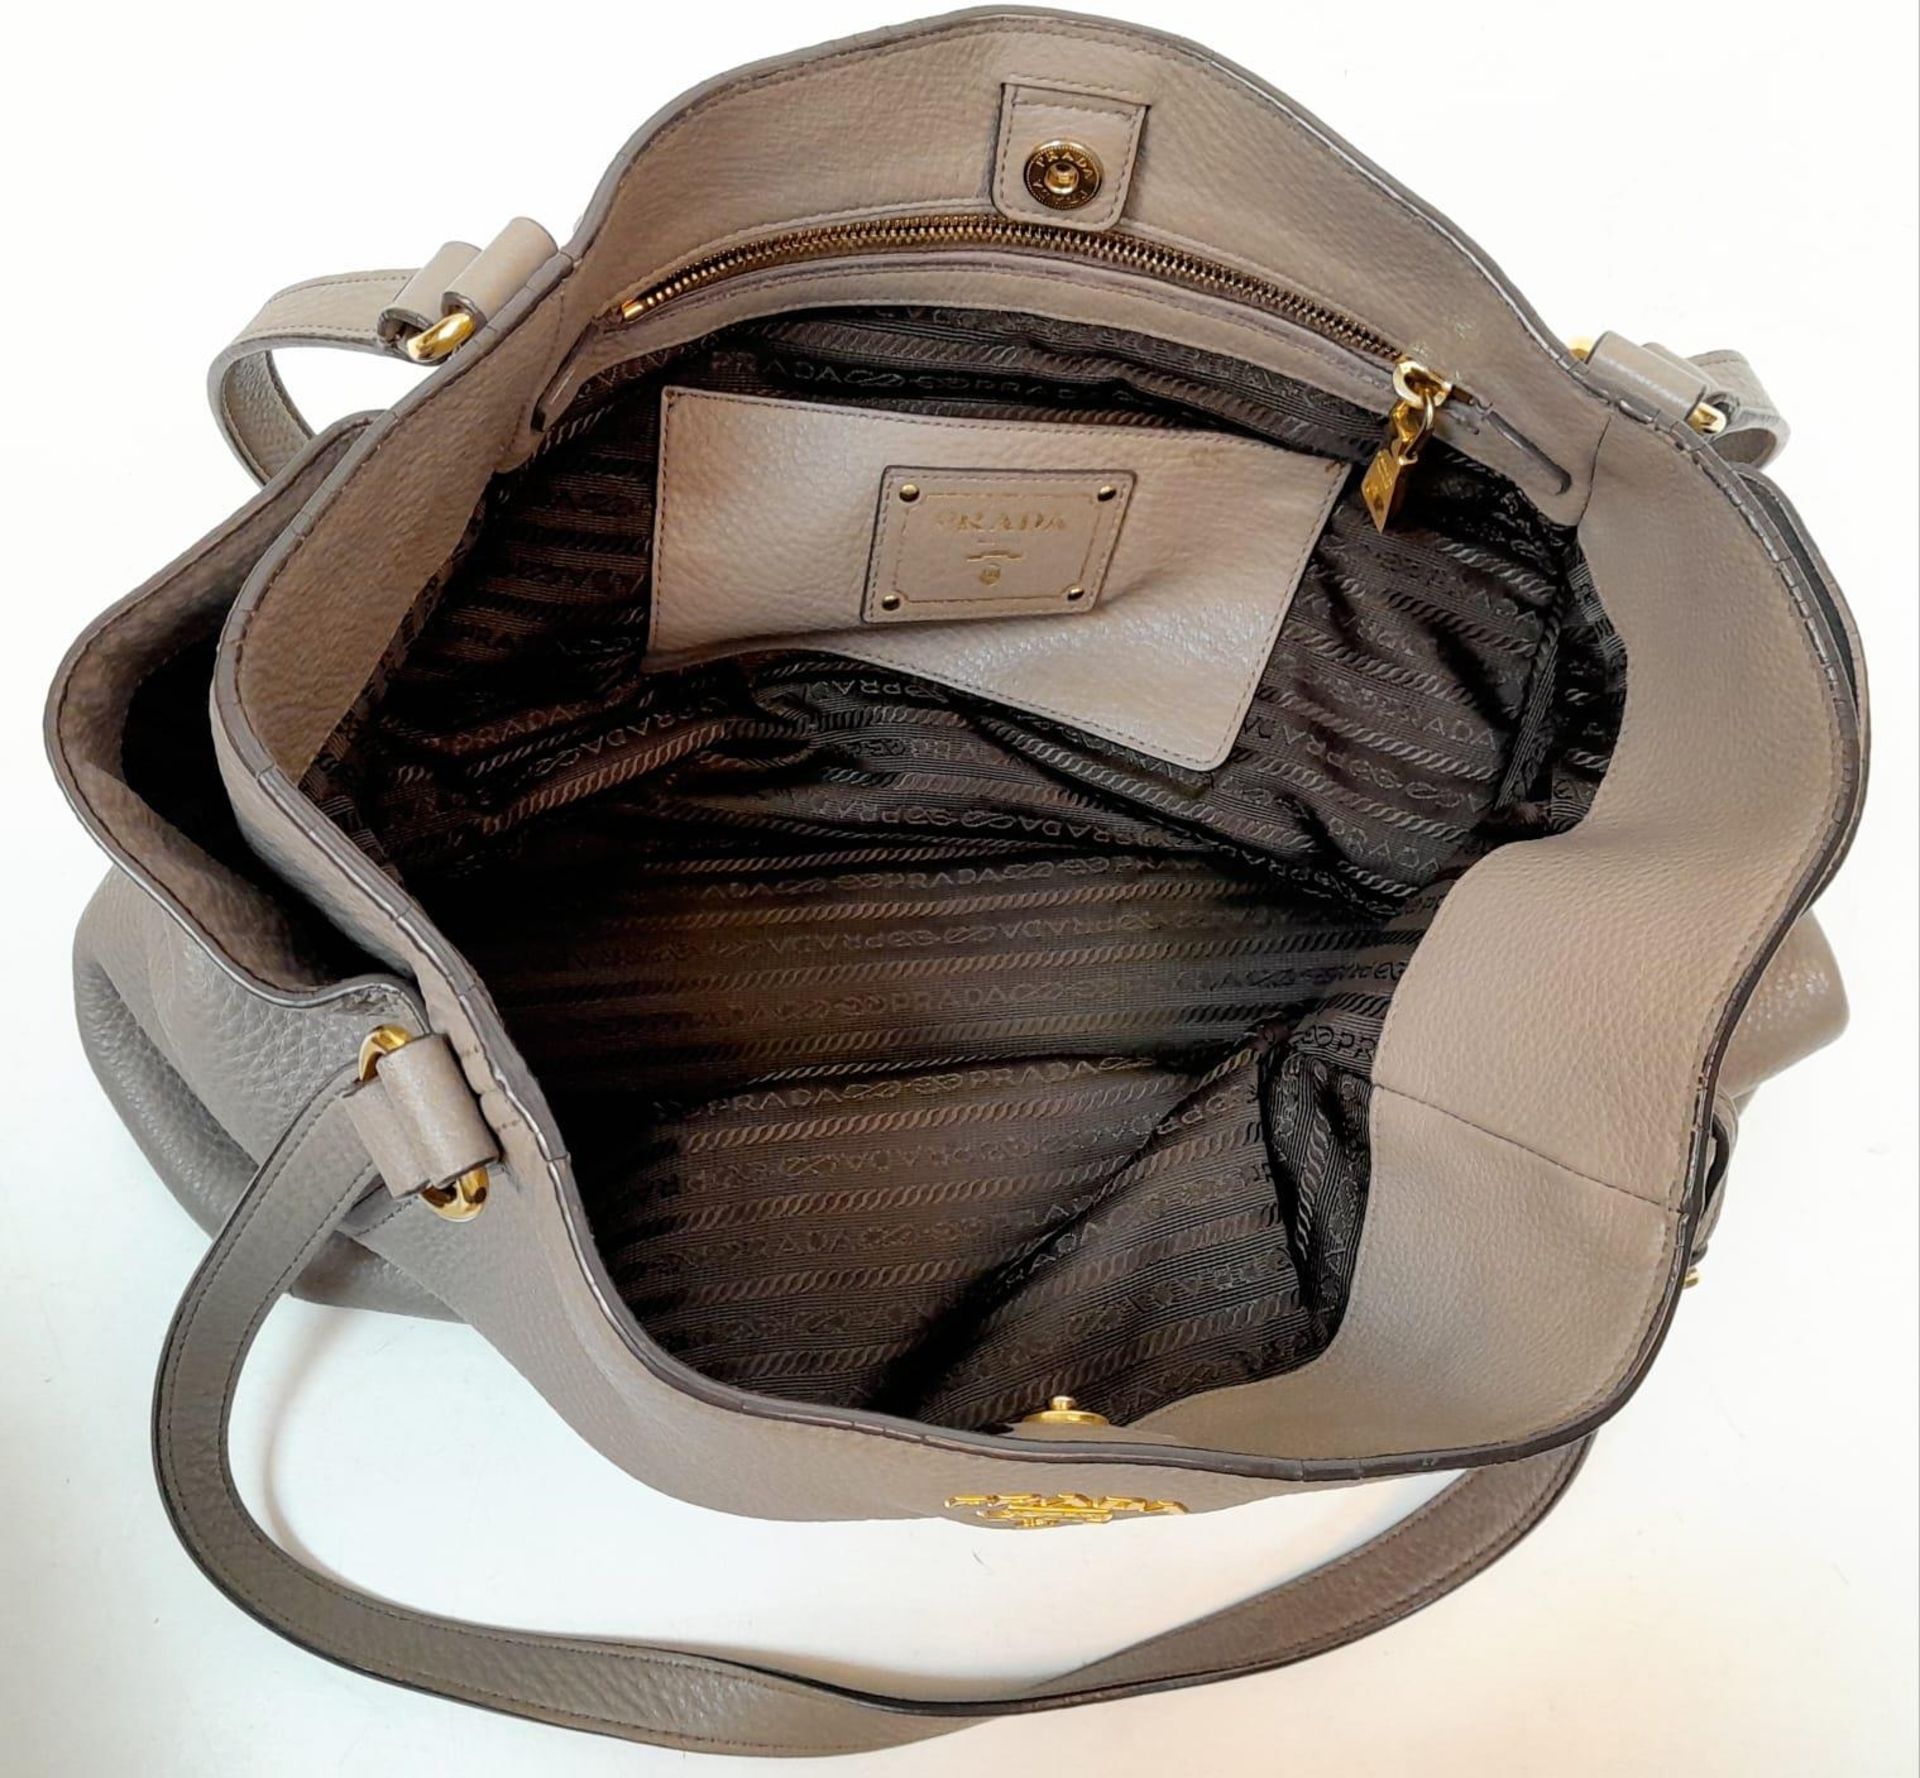 A Prada Grey Leather Shoulder Bag. Textured leather exterior with gold tone hardware. Textile and - Image 4 of 9